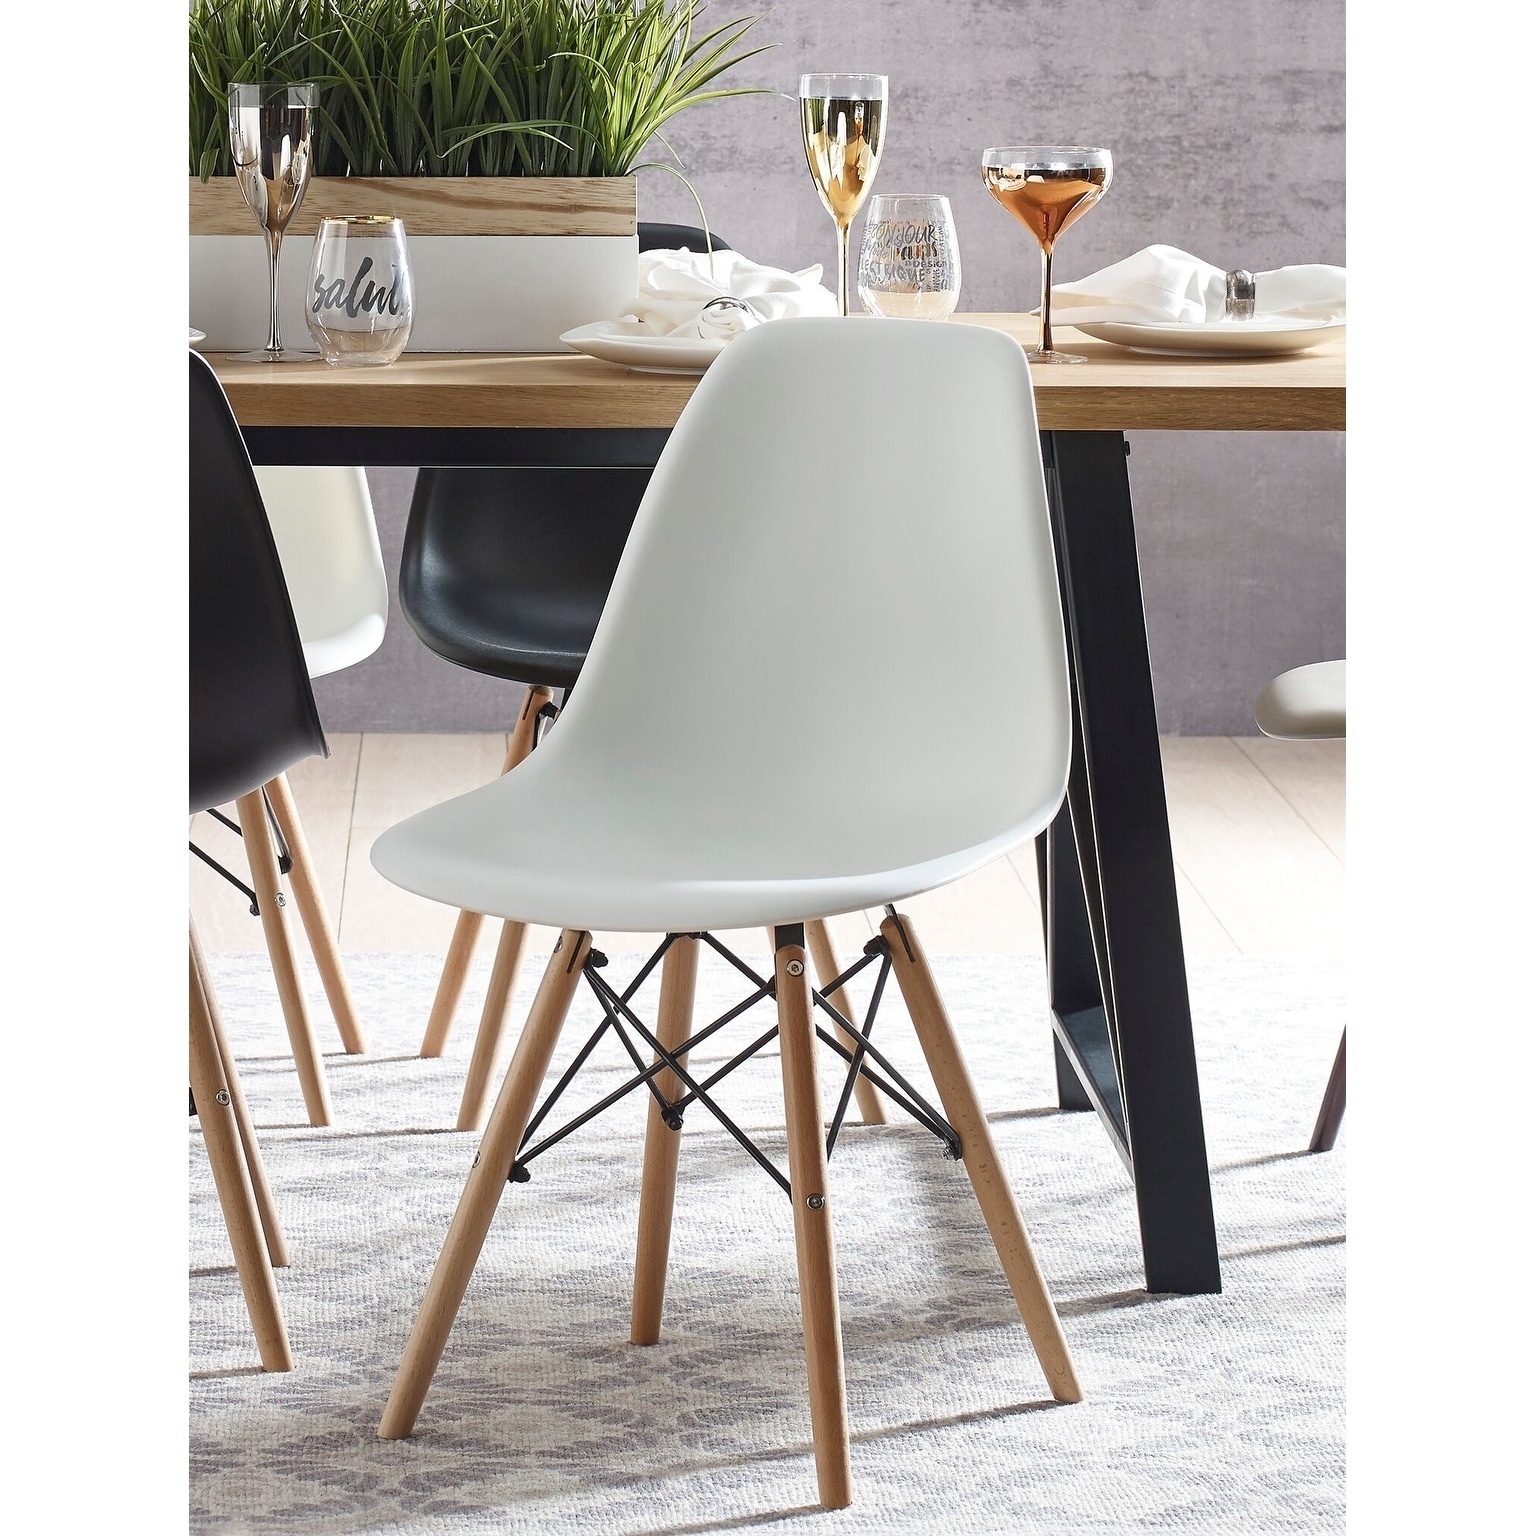 Elle Decor Dining Room Chairs